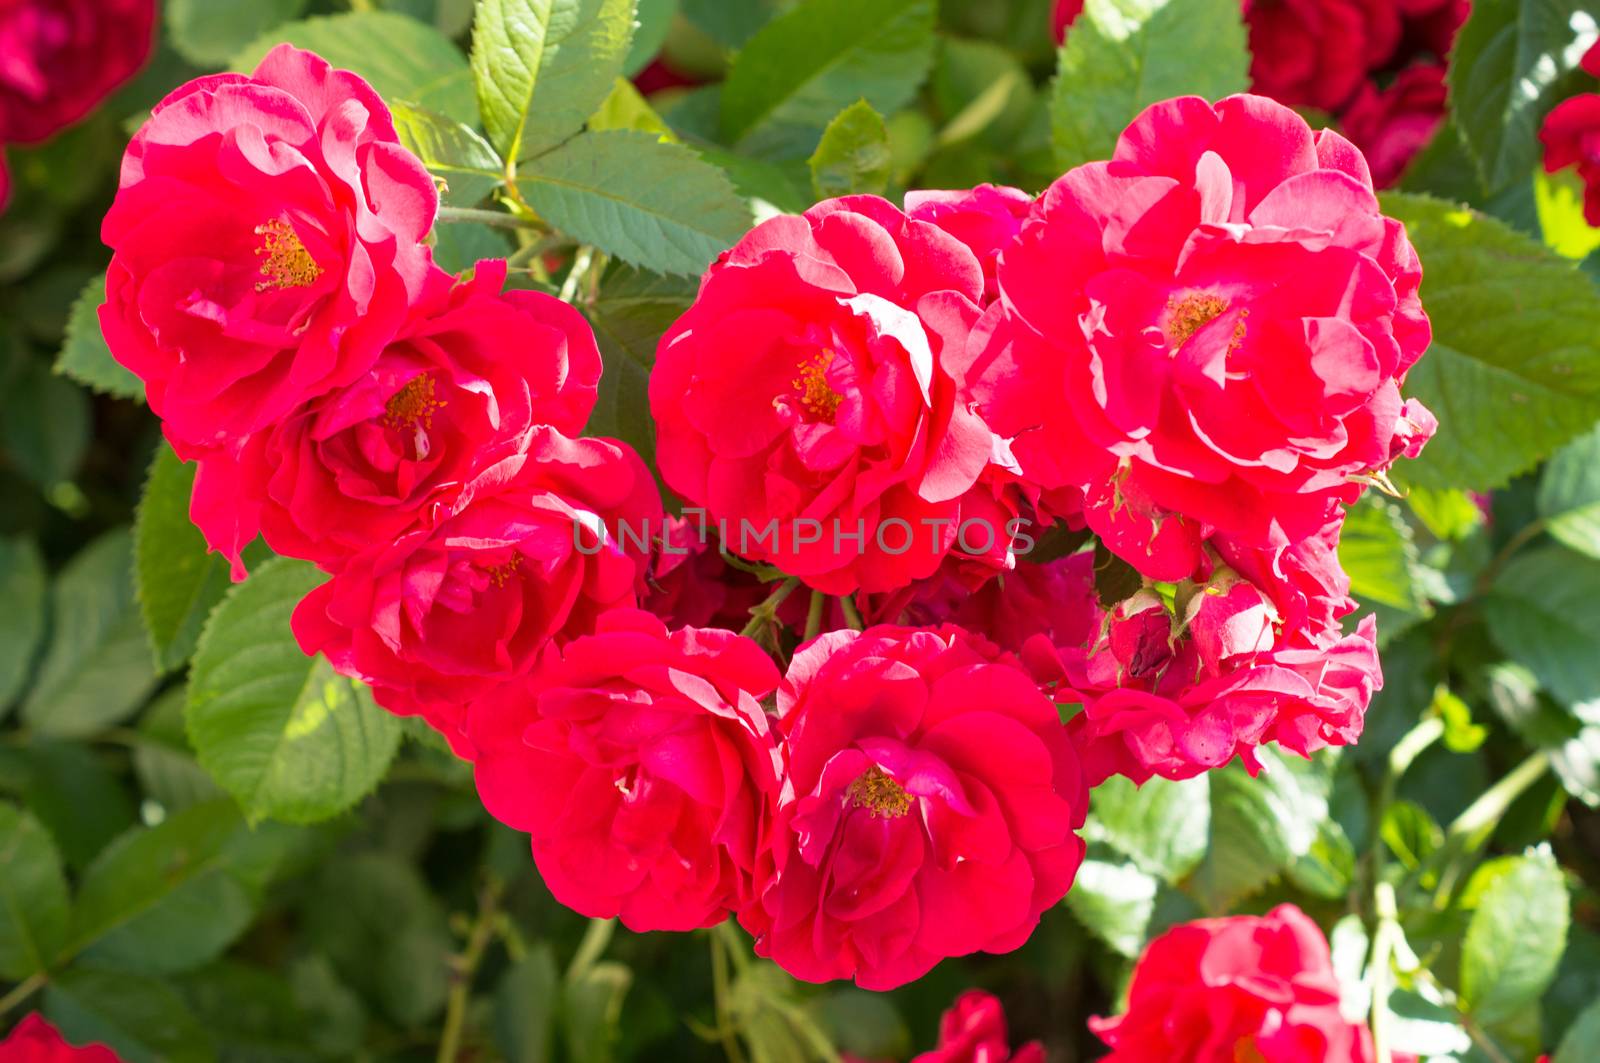 Red rose bushes with green leaves, a perfect gift for a woman for any occasion. Luxury view on a summer day .For your design